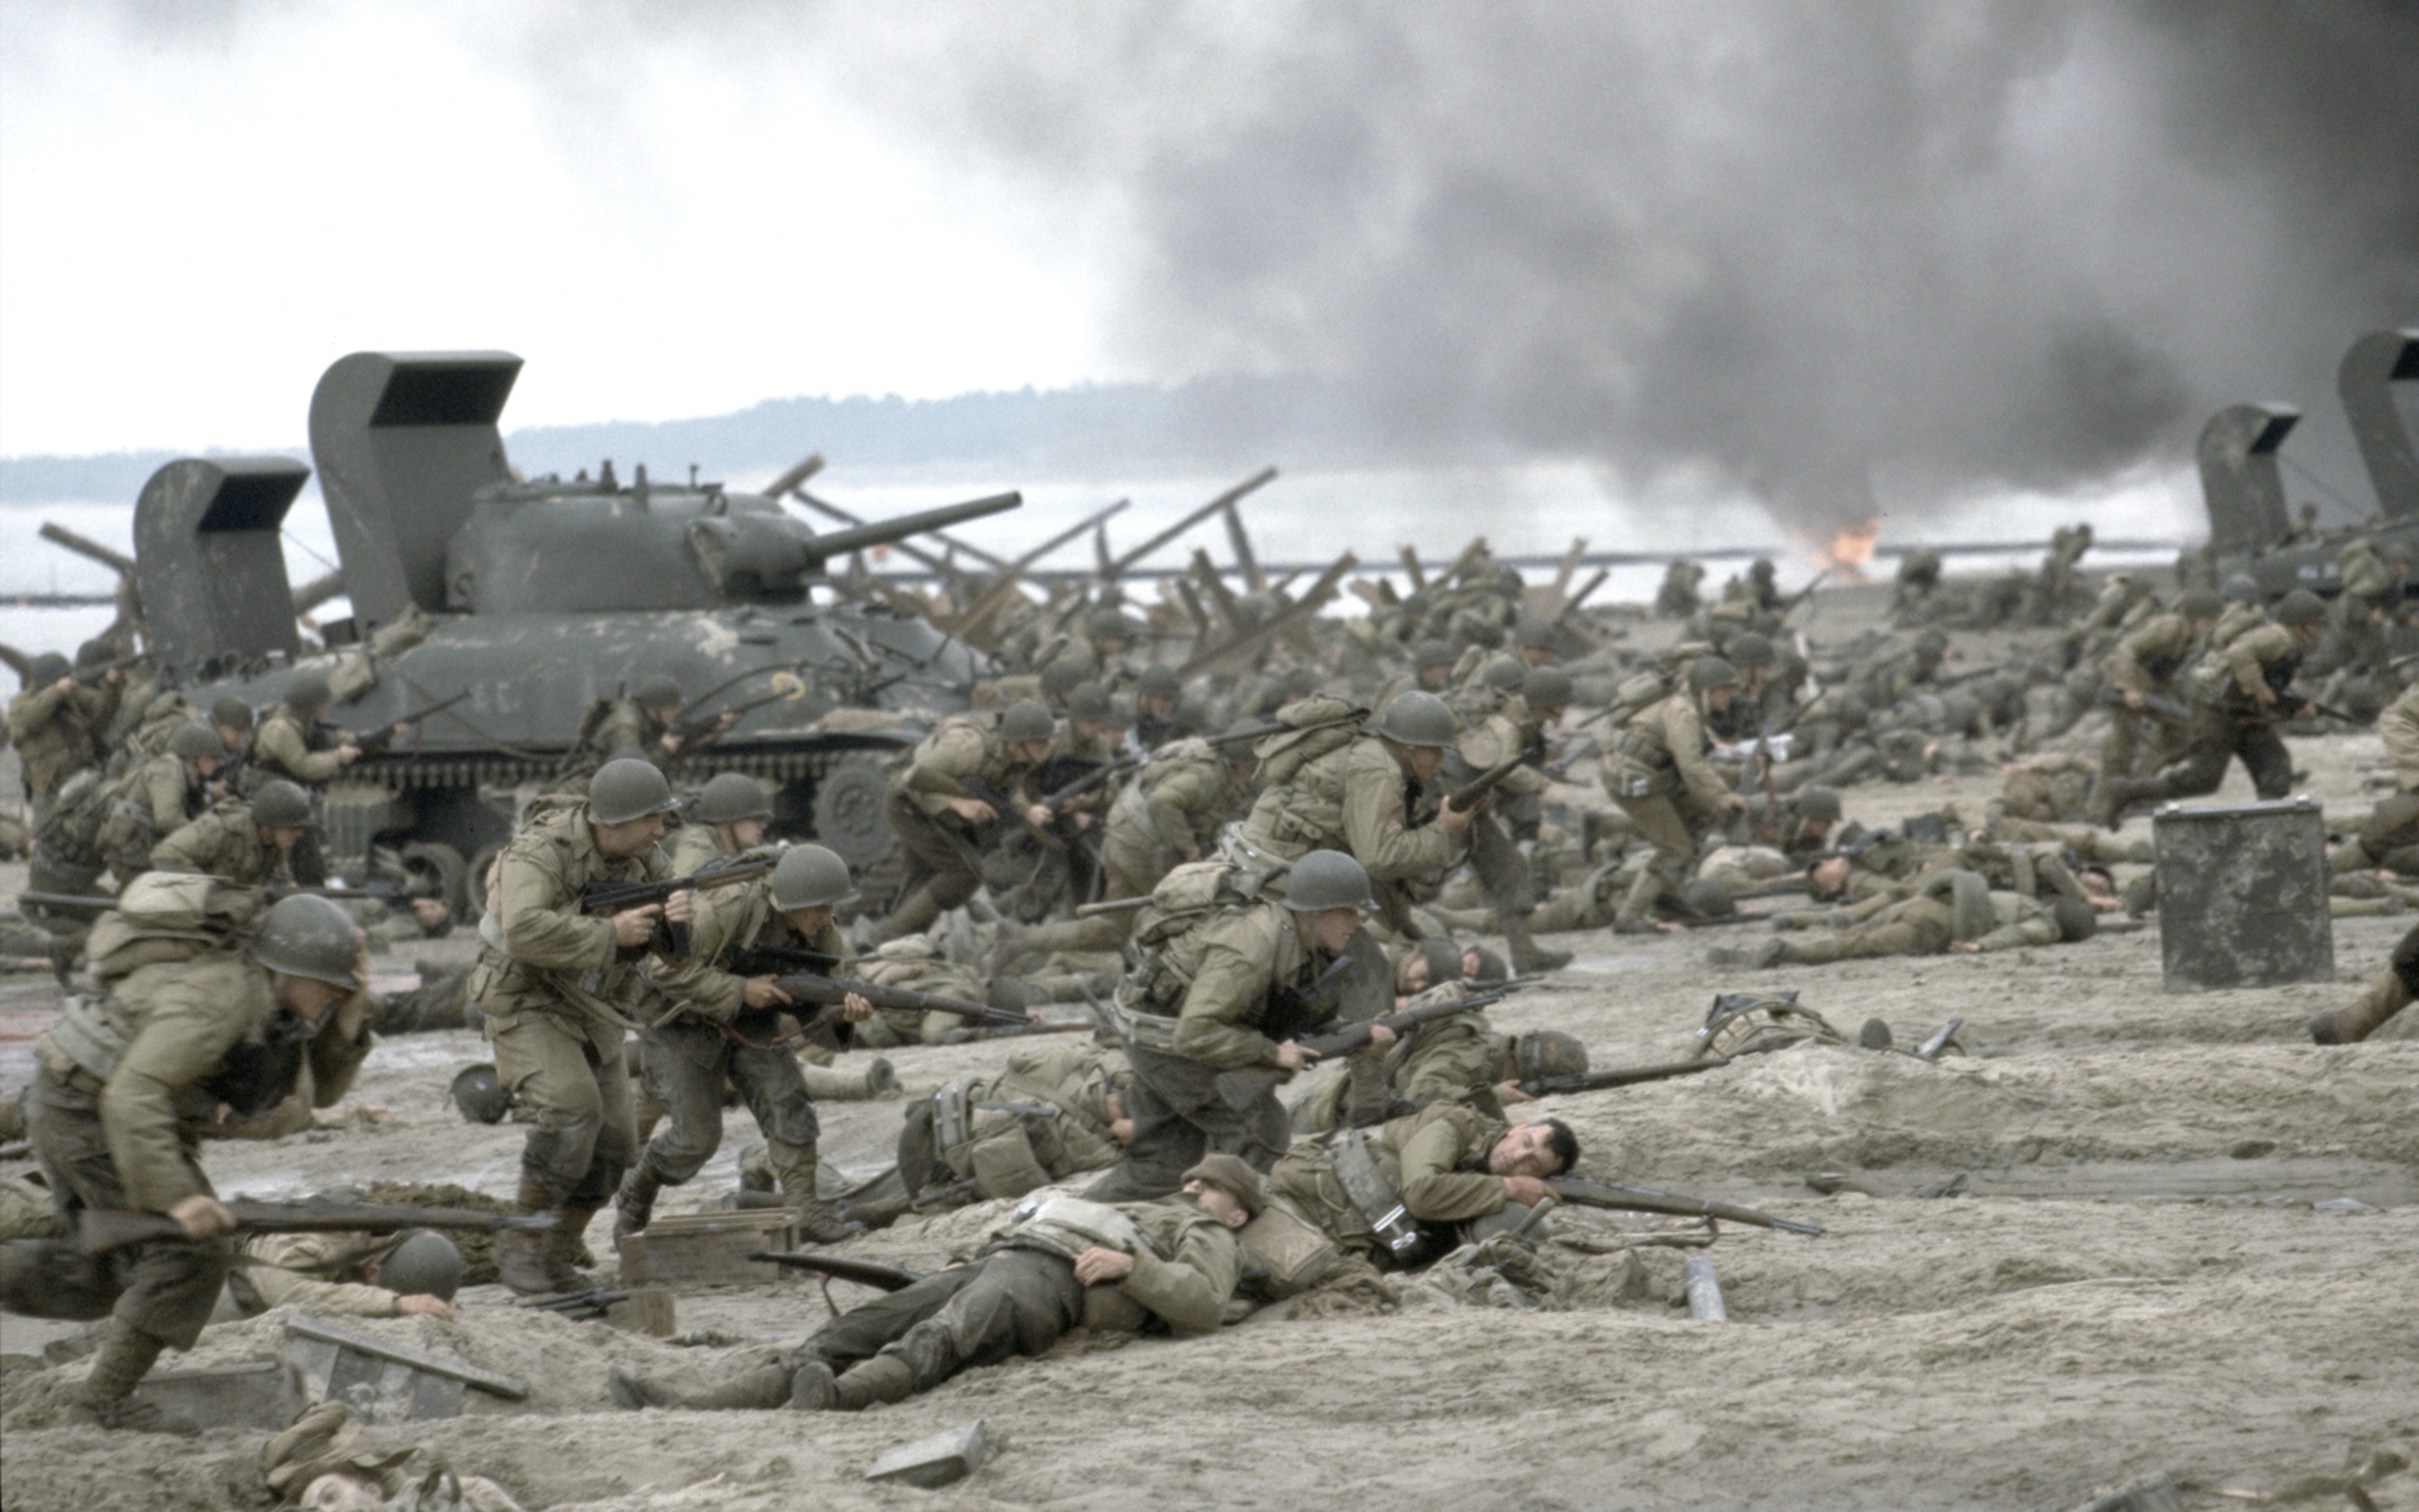 <p>Despite all the money spent and extras hired, Spielberg did not plan the Omaha Beach landing to a tee. Spielberg didn’t even storyboard the scene. He said he wanted spontaneous reactions and let the action inspire his camera shots, not the other way around.</p><p><a href='https://www.msn.com/en-us/community/channel/vid-cj9pqbr0vn9in2b6ddcd8sfgpfq6x6utp44fssrv6mc2gtybw0us'>Follow us on MSN to see more of our exclusive entertainment content.</a></p>